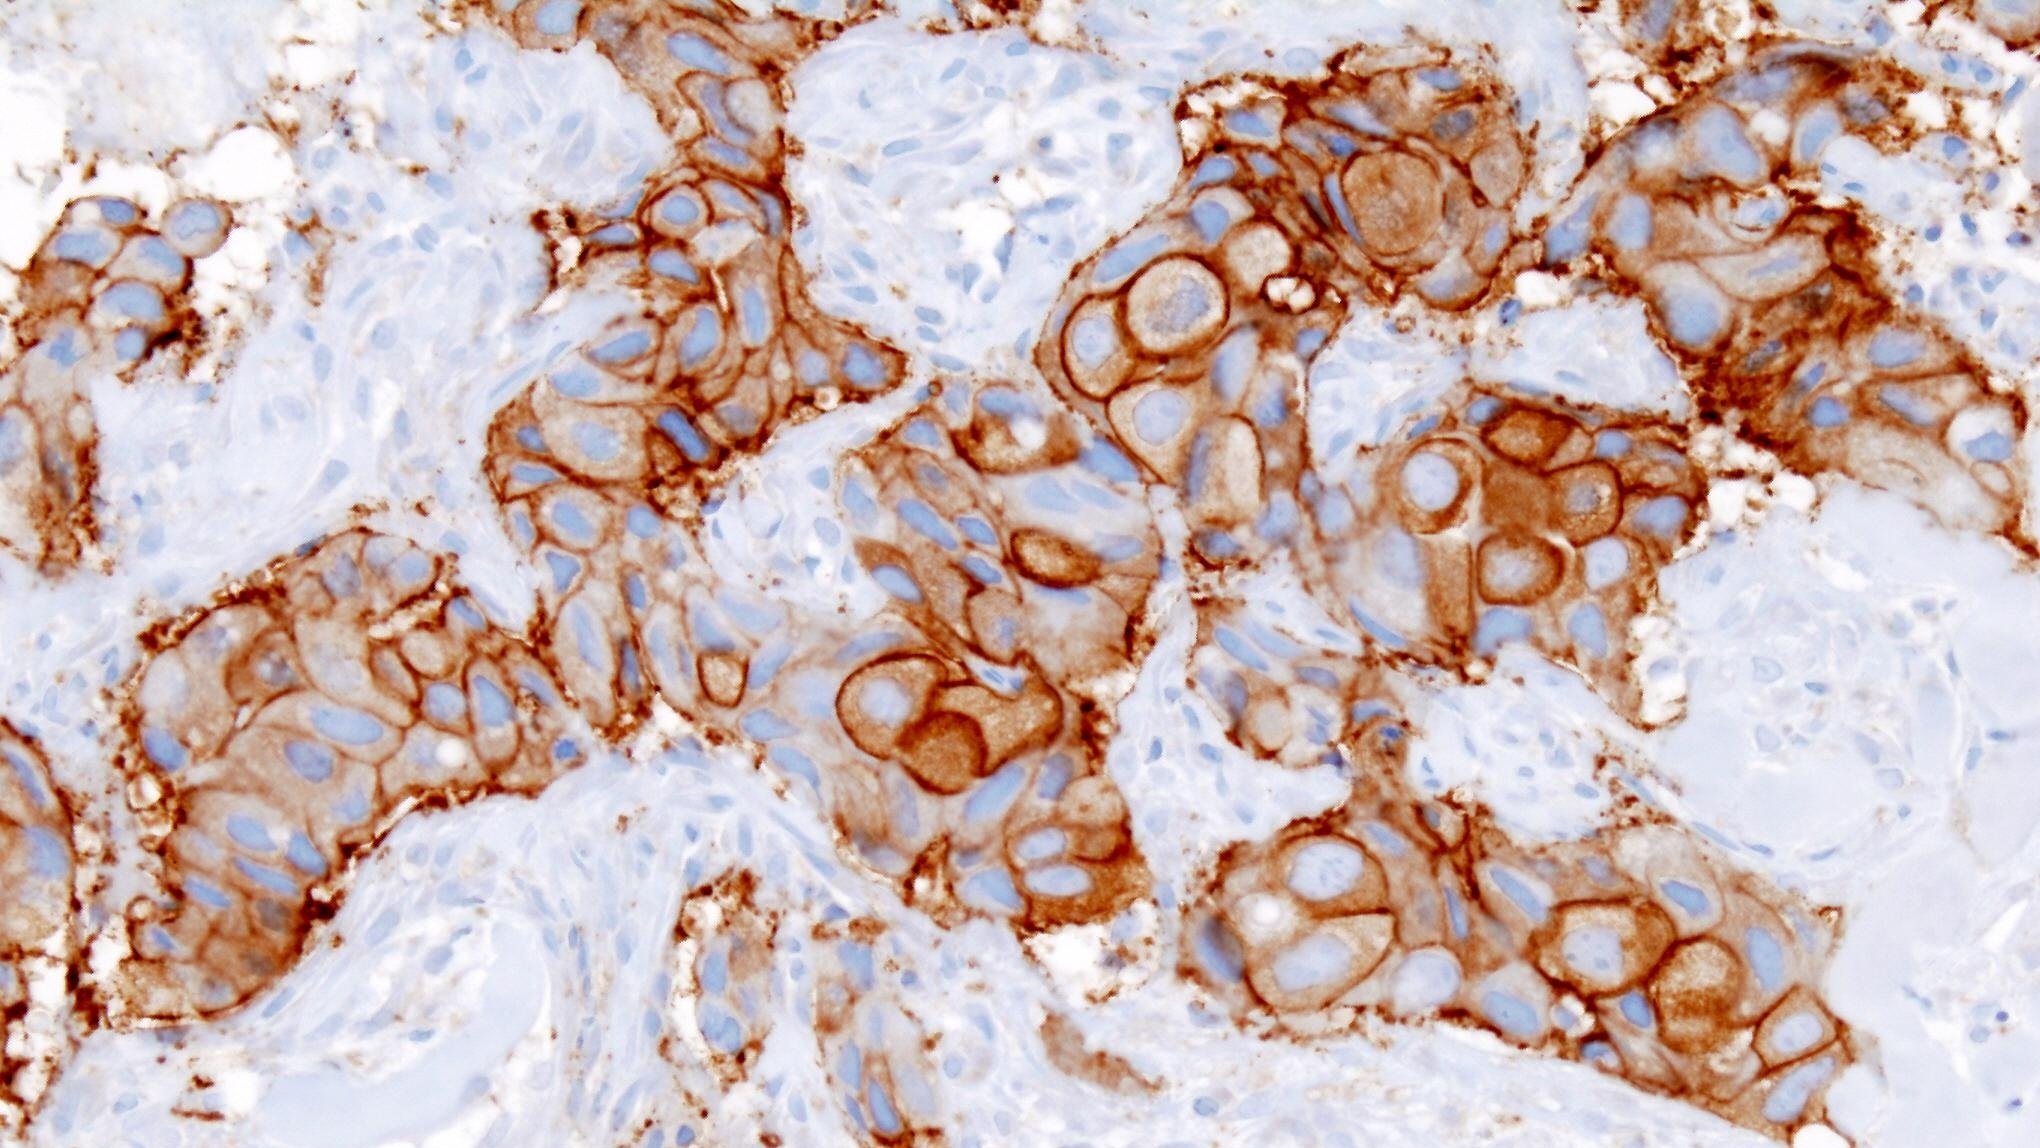 Micrograph of Breast Cancer cells stained brown for HER2 receptors